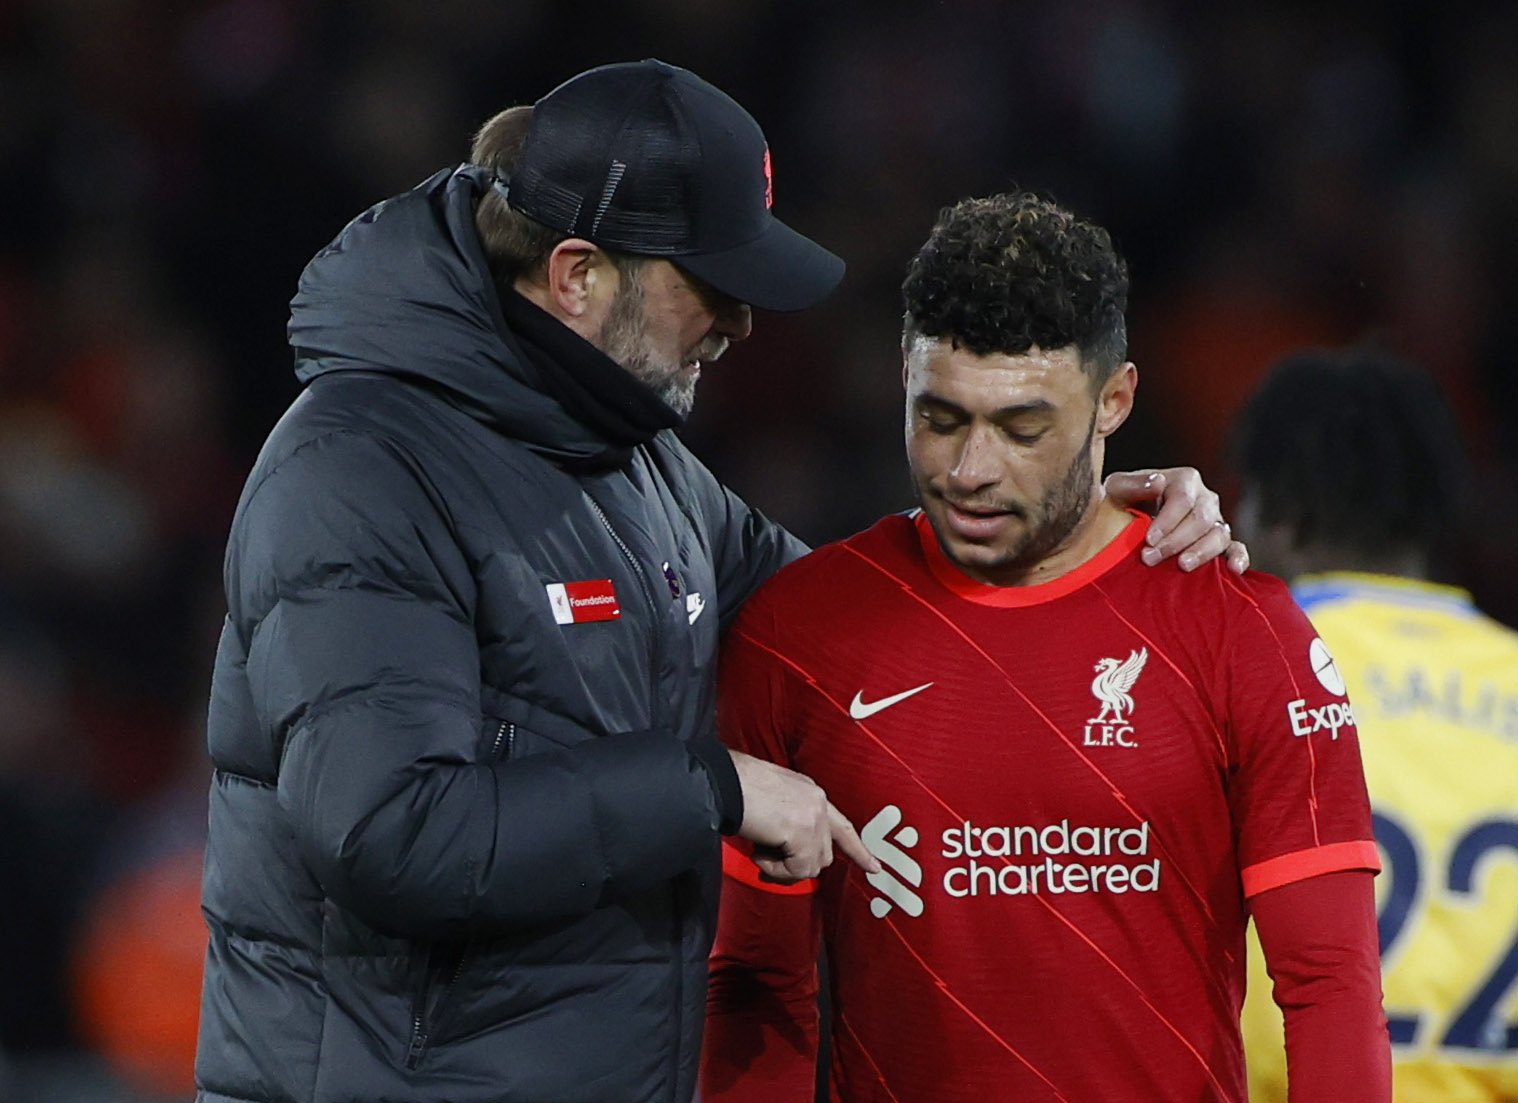 Liverpool's Alex Oxlade-Chamberlain with manager Juergen Klopp after the match